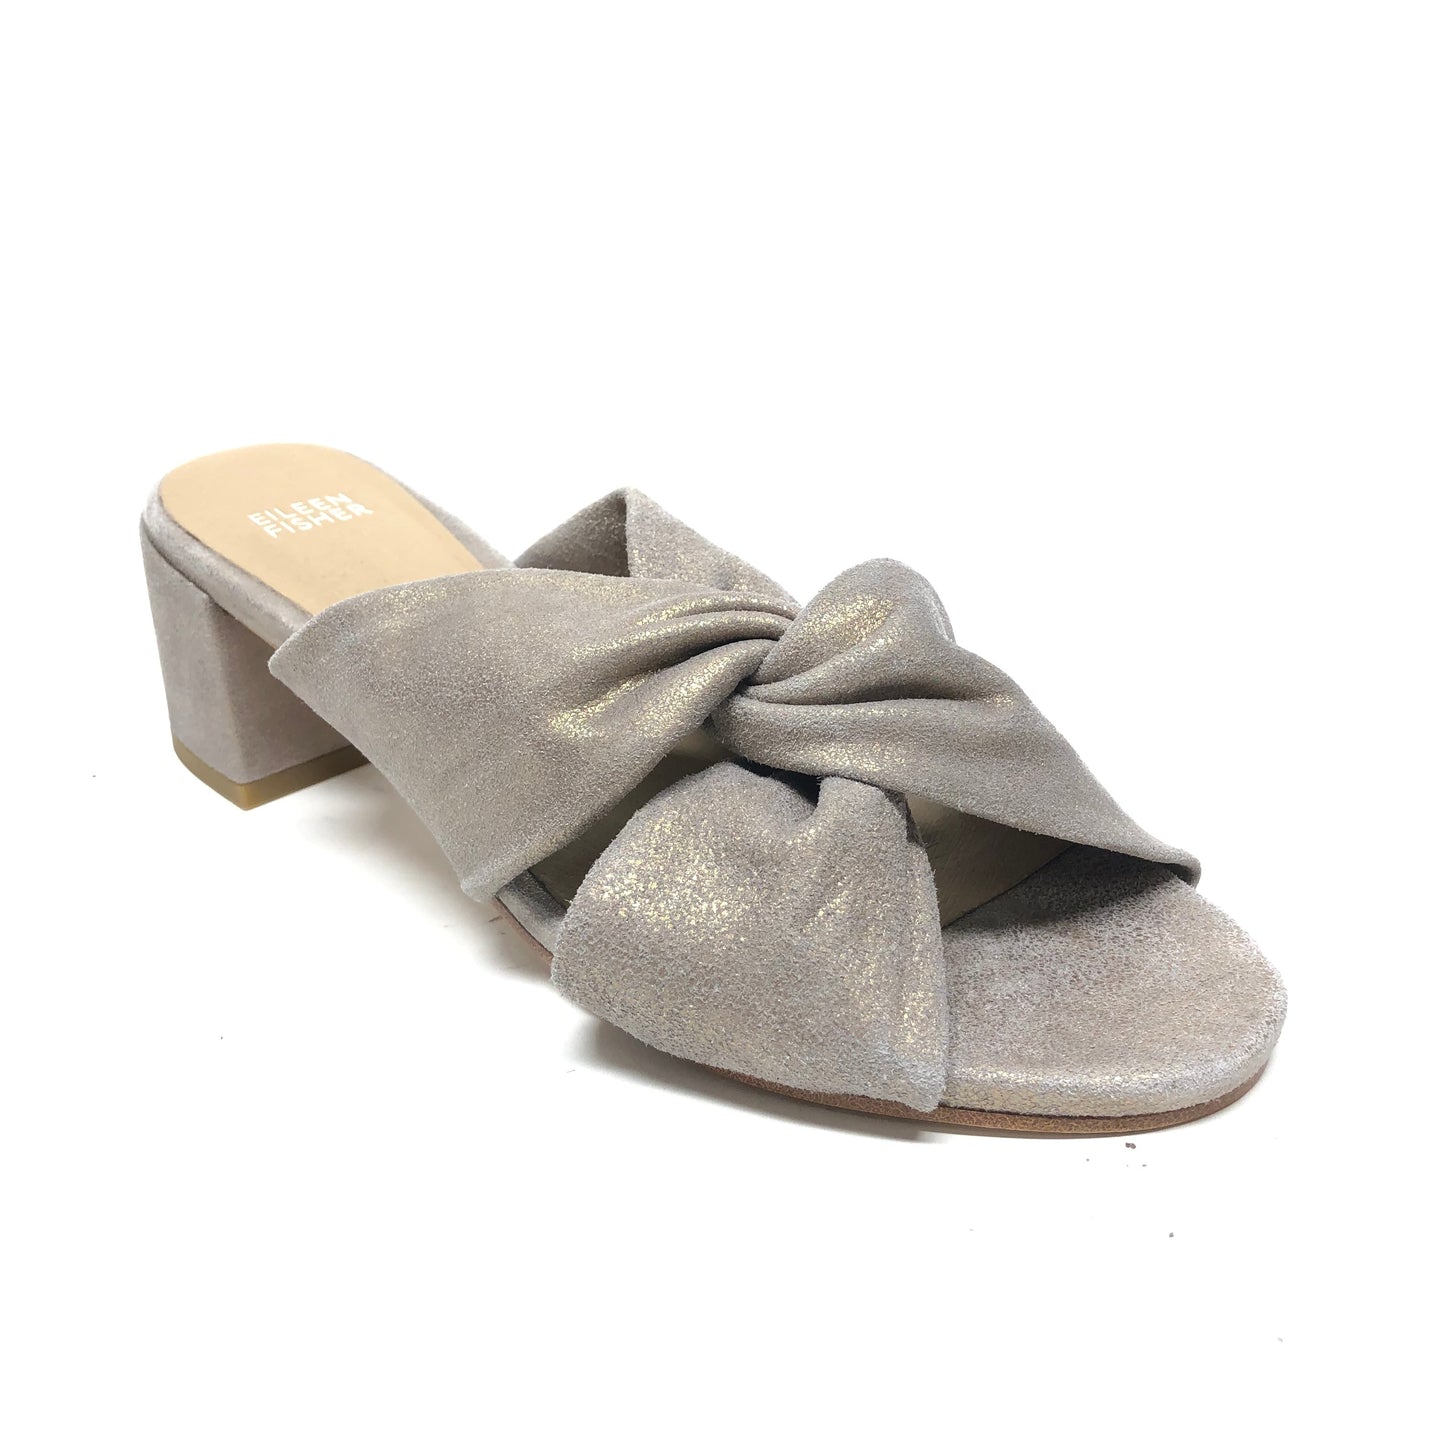 Shoes Heels Block By Eileen Fisher  Size: 9.5